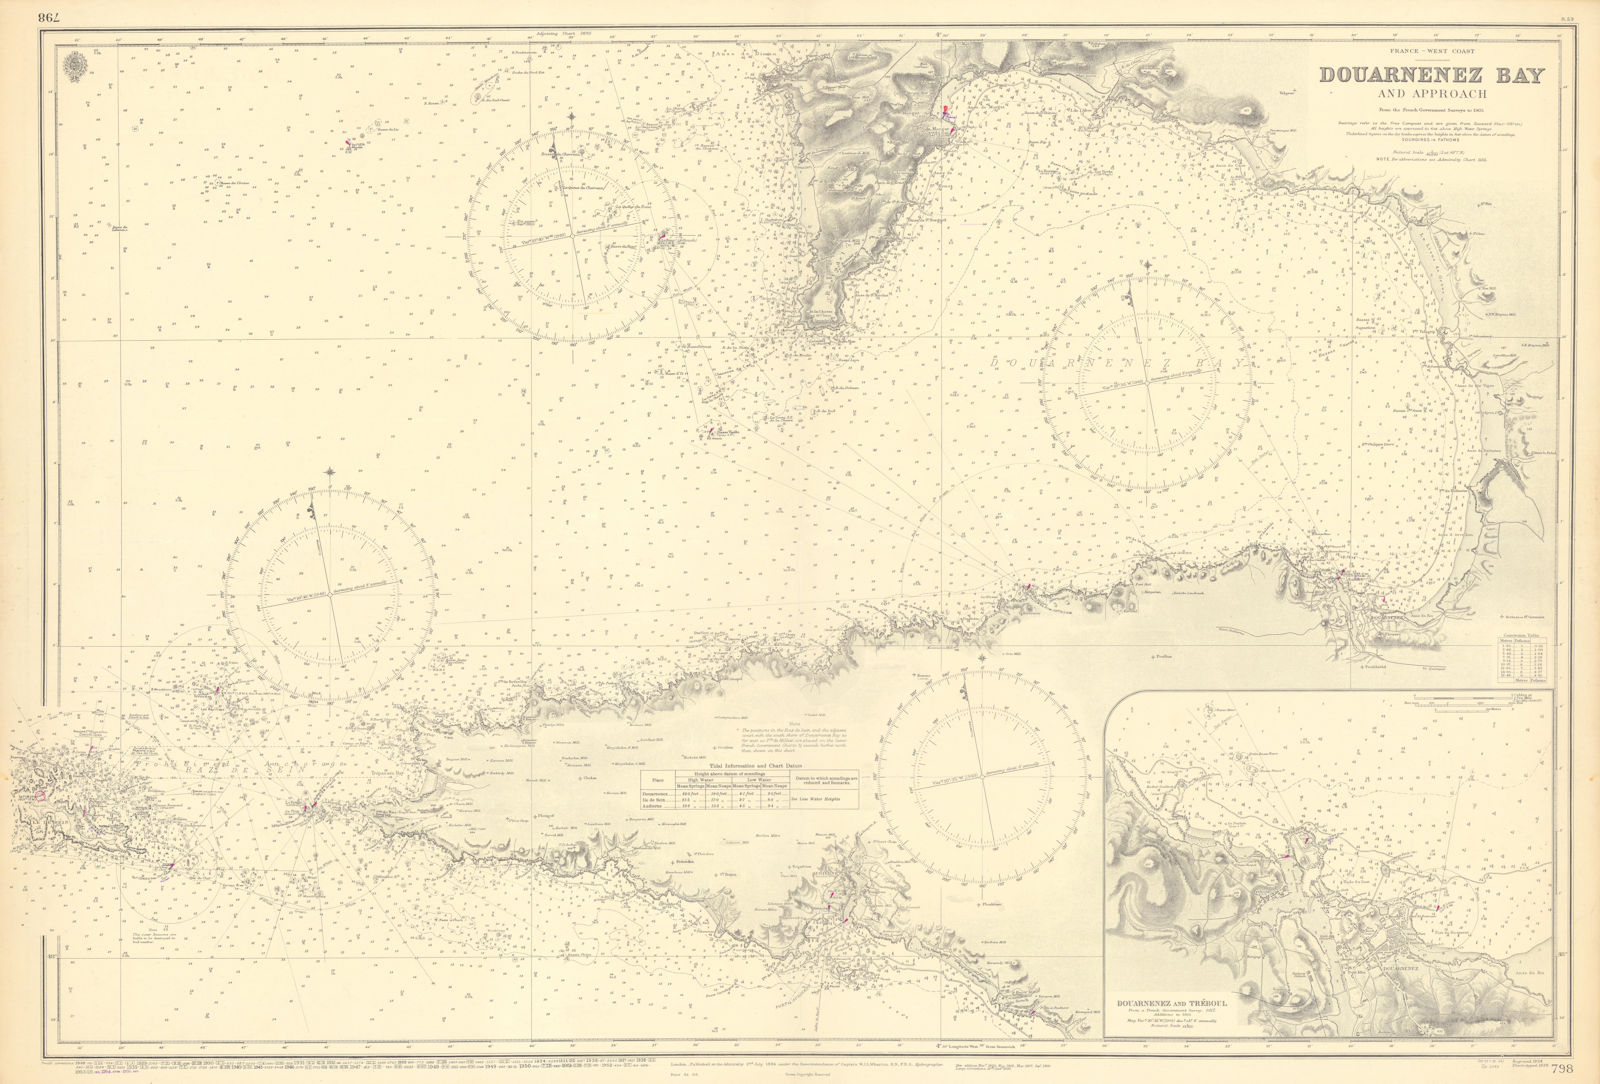 Douarnenez Bay & approaches. Finistère. ADMIRALTY sea chart 1894 (1955) map